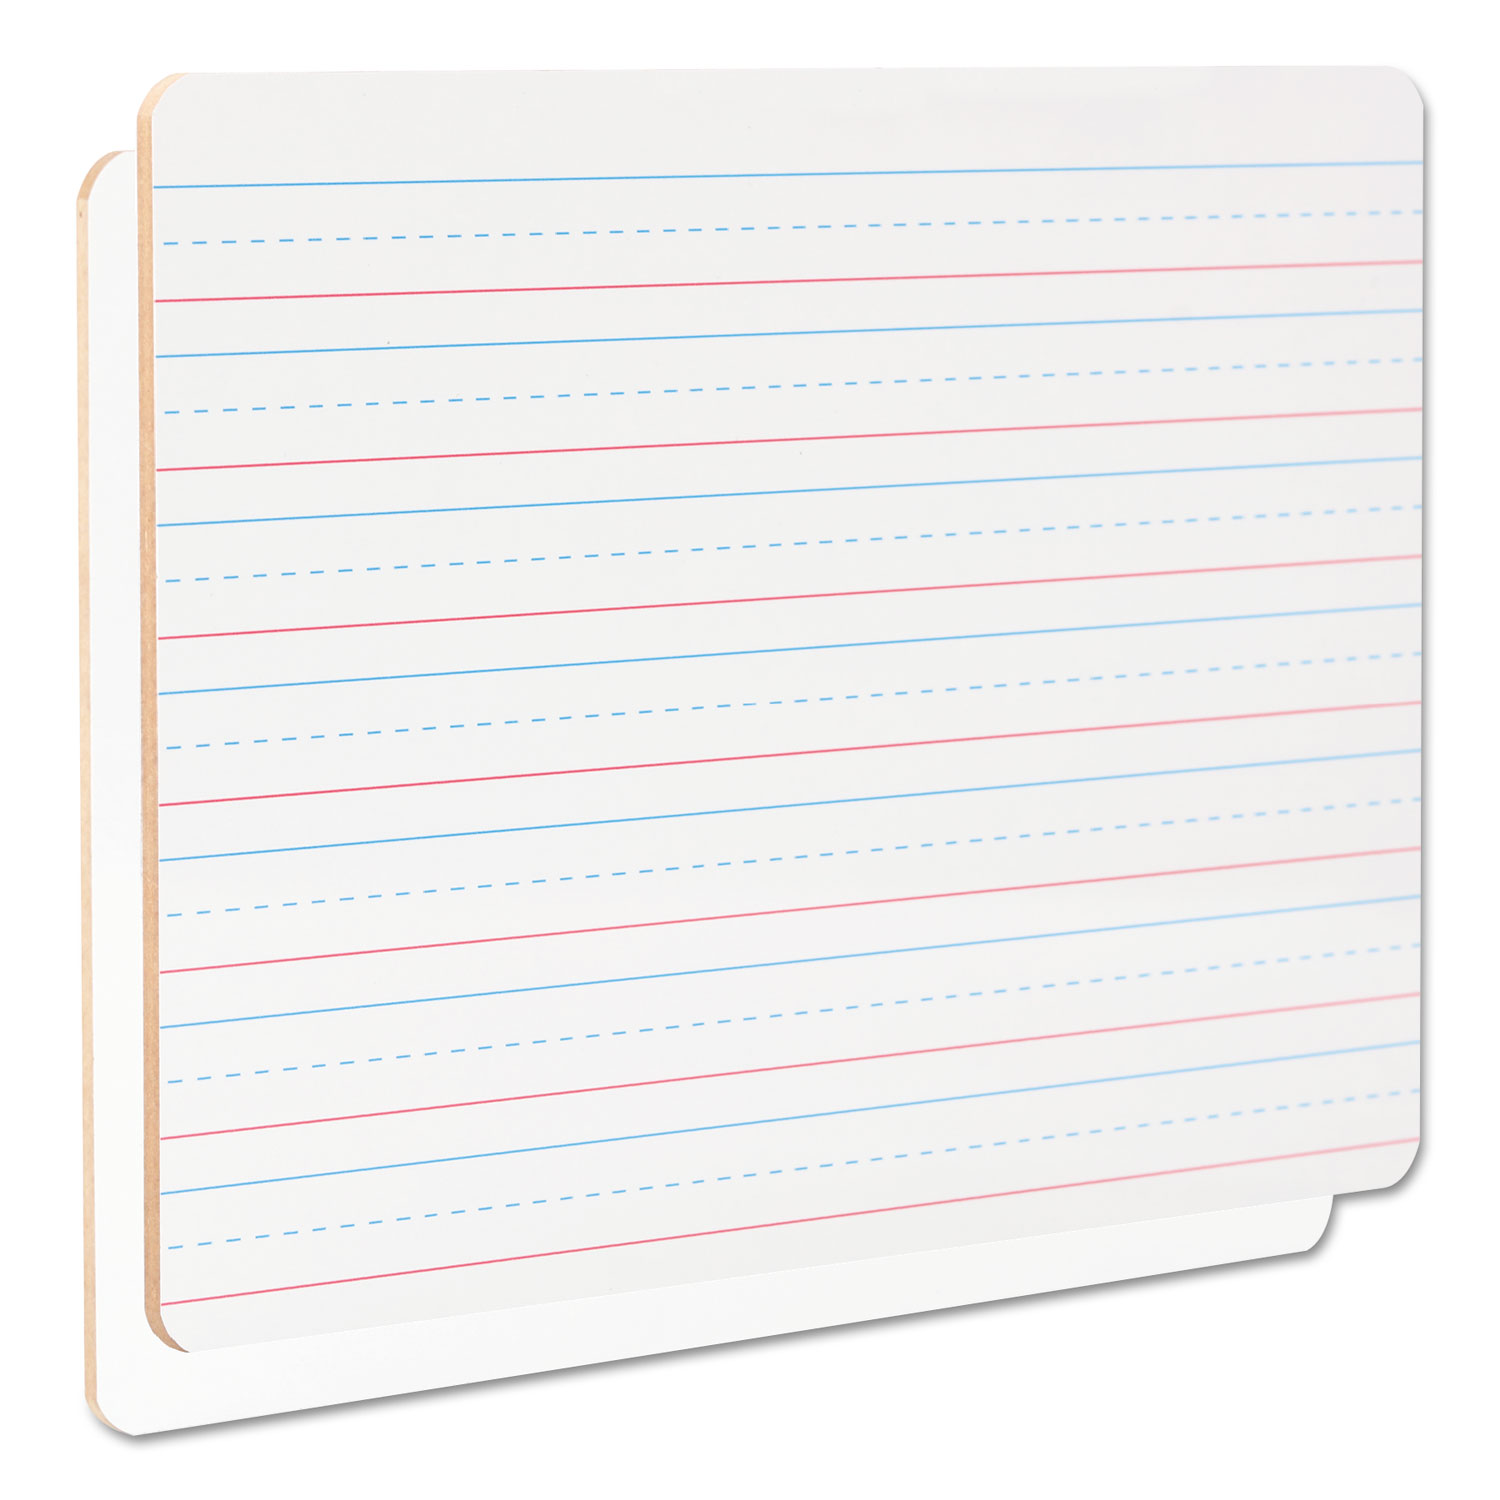  Universal UNV43911 Lap/Learning Dry-Erase Board, Lined, 11 3/4 x 8 3/4, White, 6/Pack (UNV43911) 